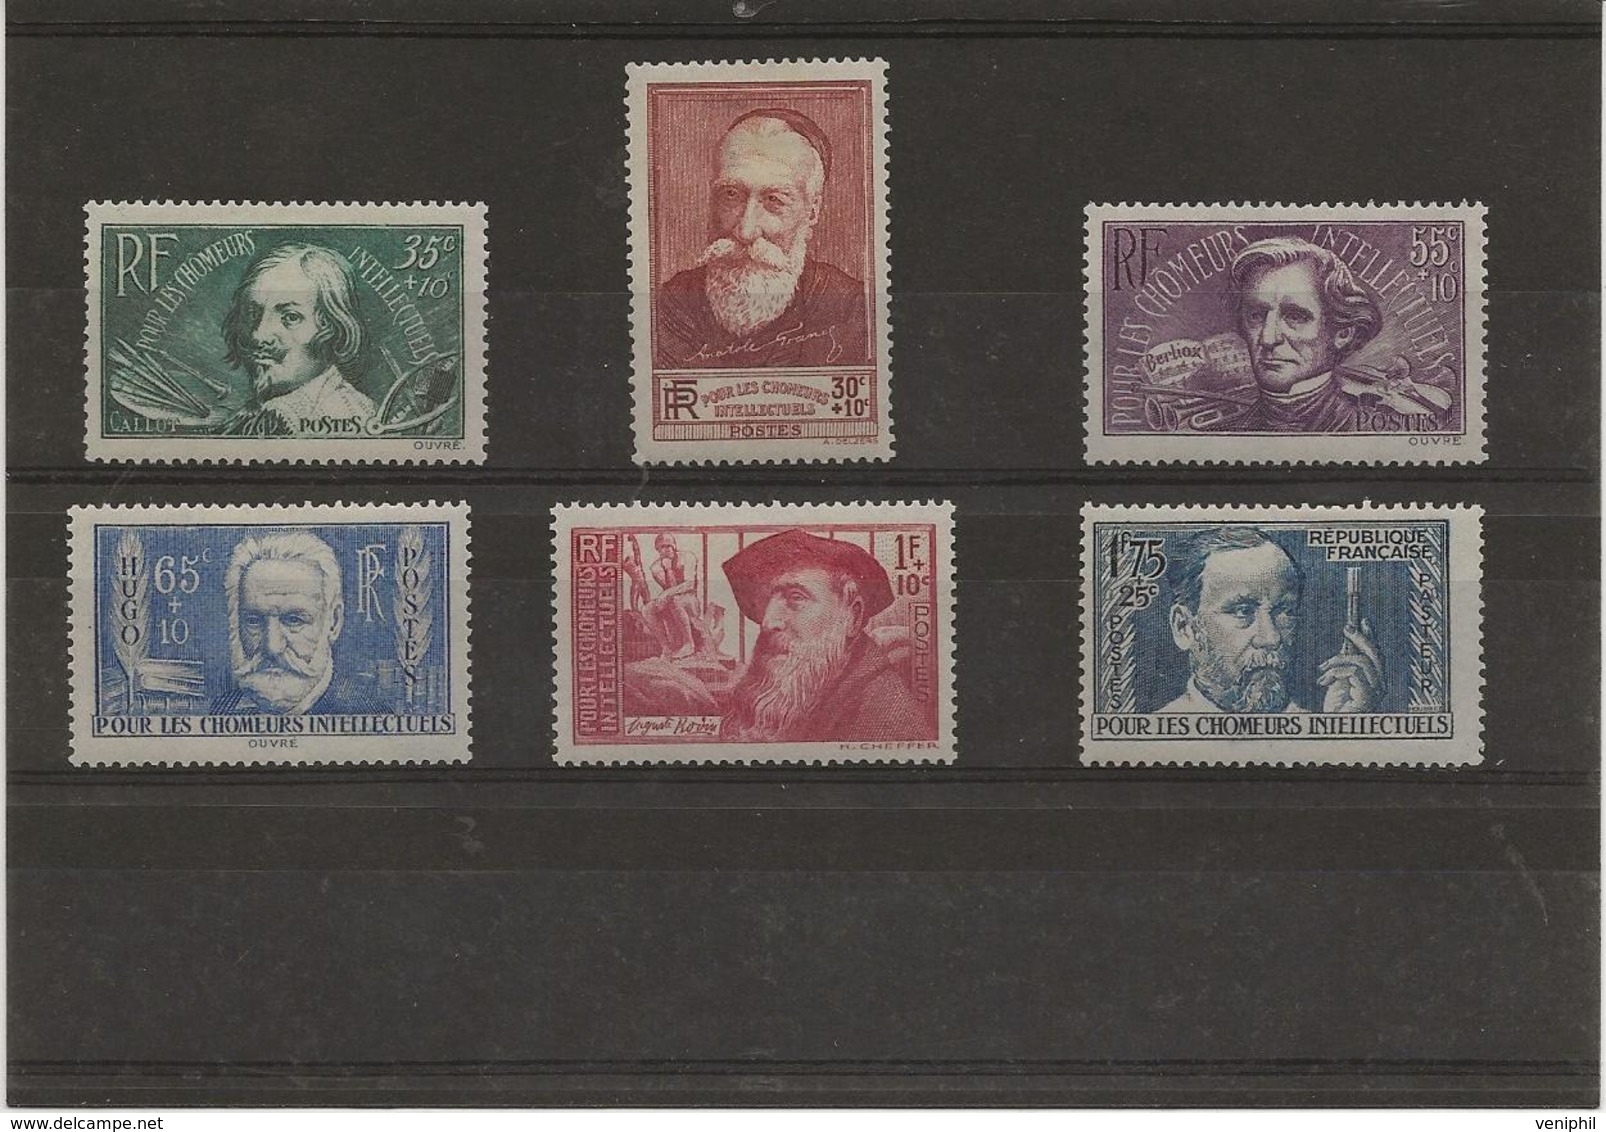 TIMBRES CHOMEURS INTELLECTUELS - N° 380 A 385 NEUF INFIME CHARNIERE - COTE : 45 € - Nuevos